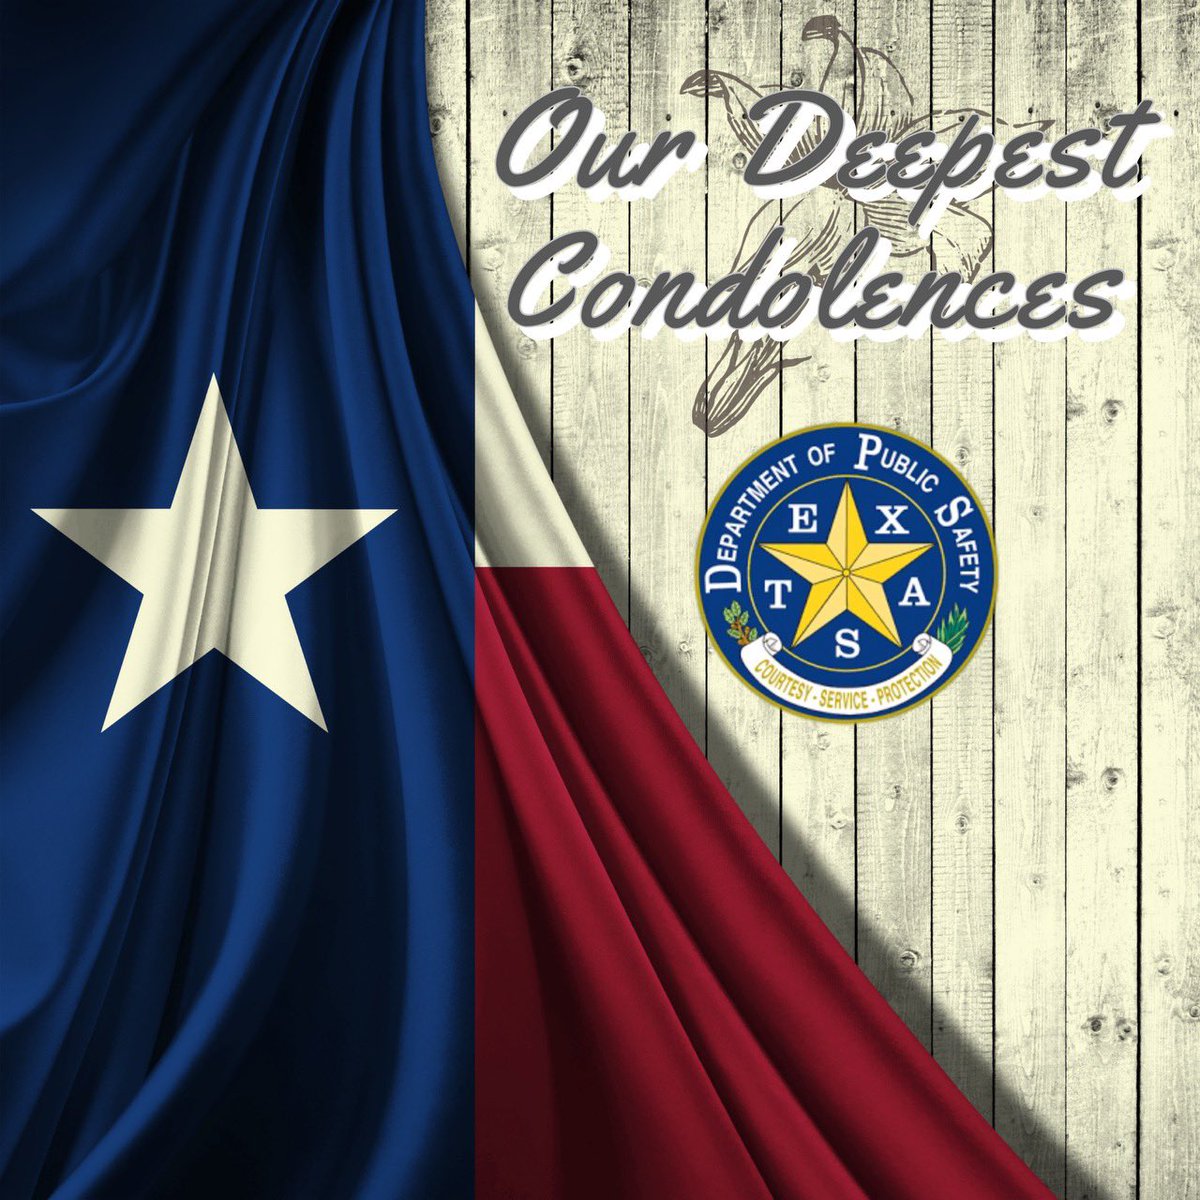 DPS and the Washington County DA’s Office confirm a second person has died as a result of the incident at the Brenham DPS Office on April 12. The victim is identified as Cheryl Turner, 63, of Brenham. We extend our deepest condolences to the families of the deceased.